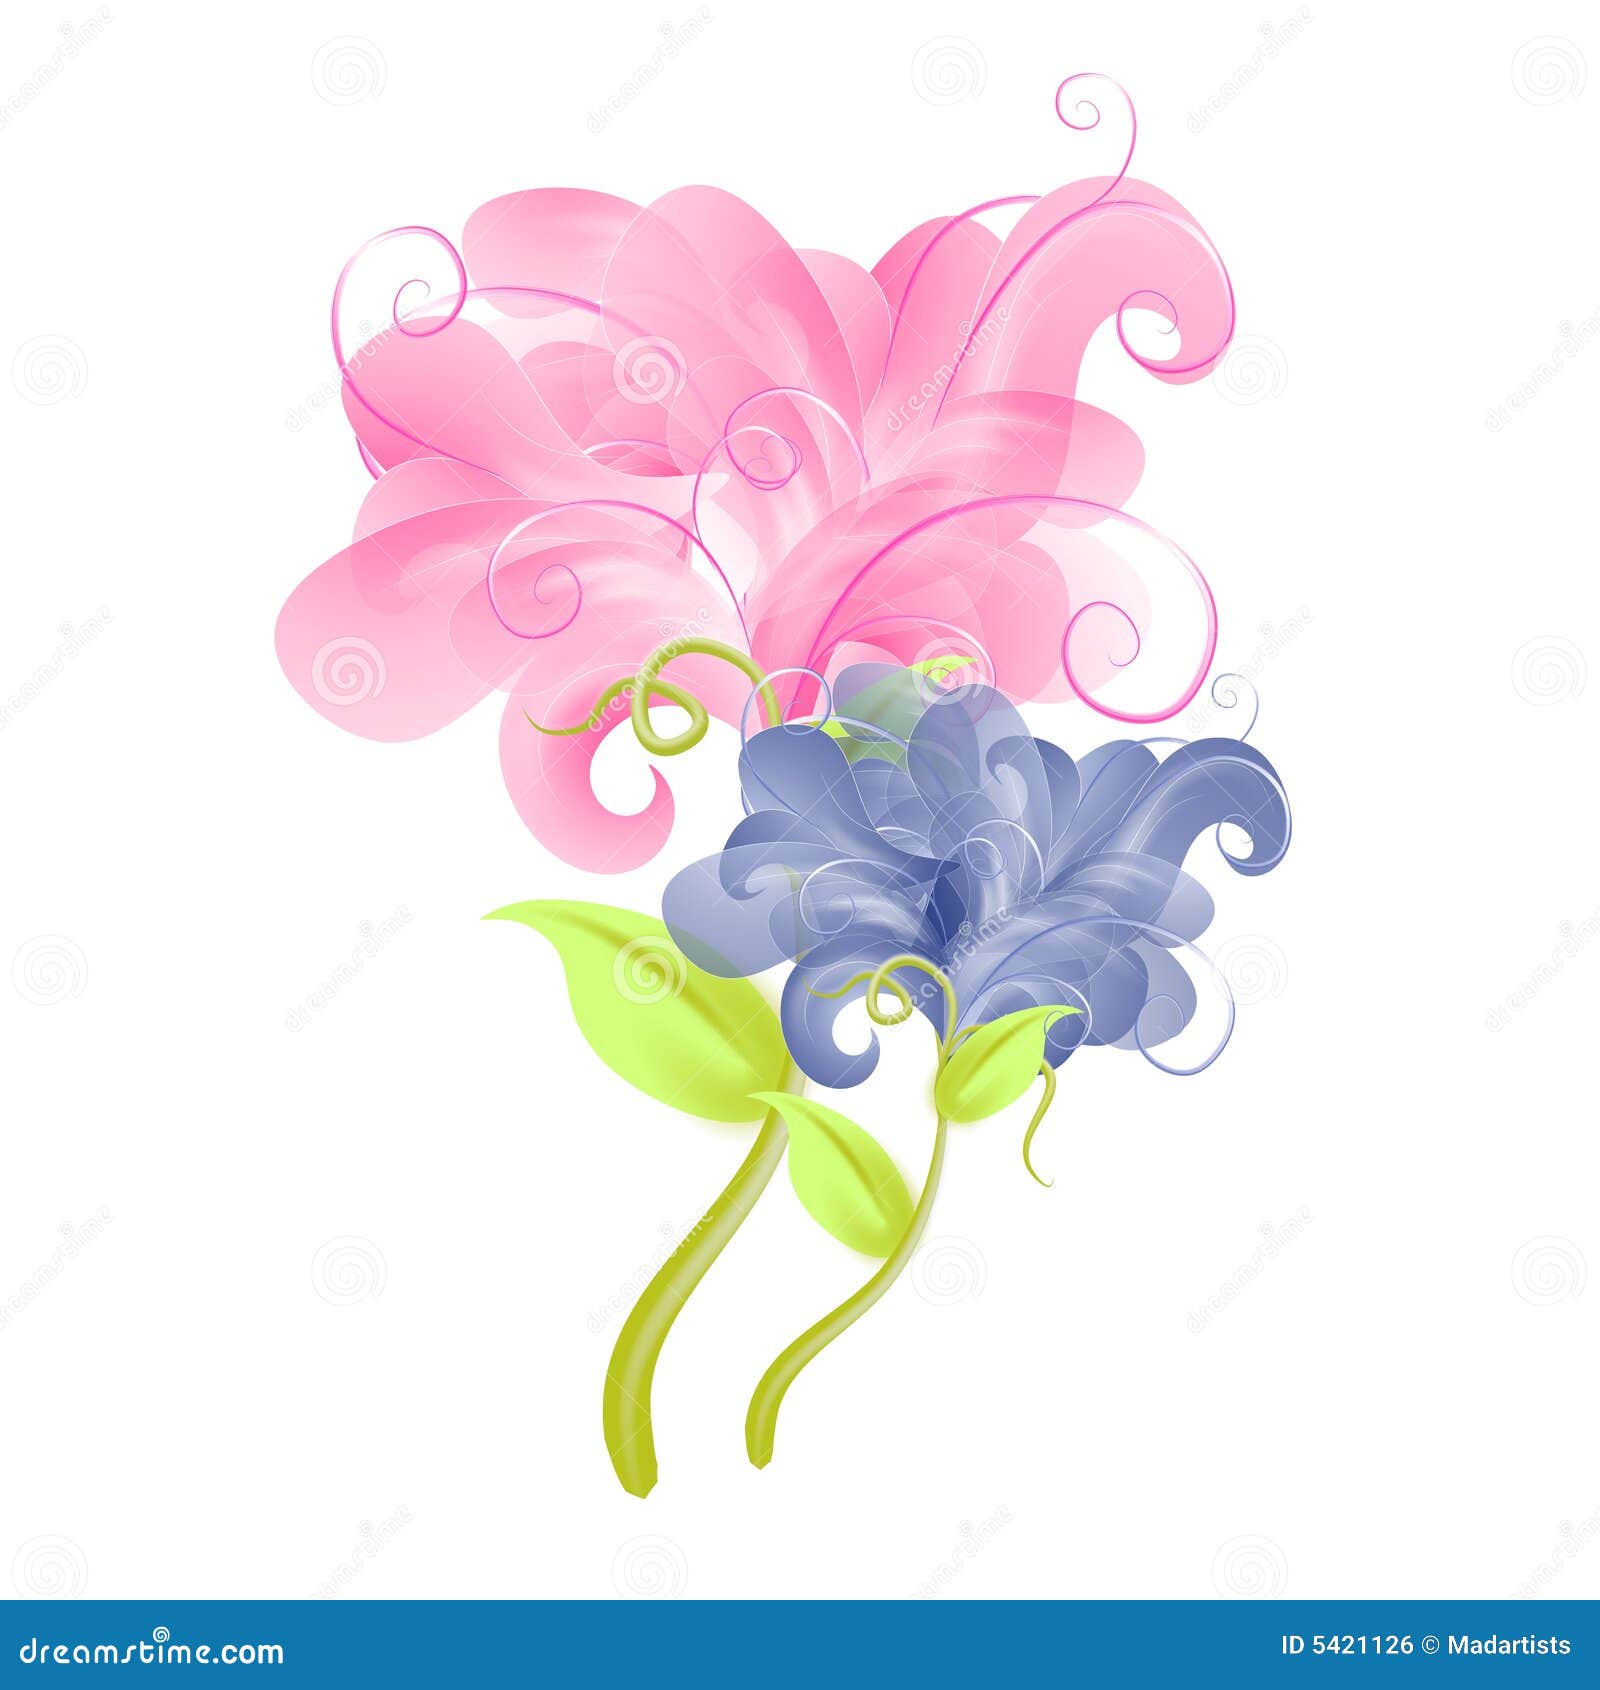 clipart delicate flowers - photo #16